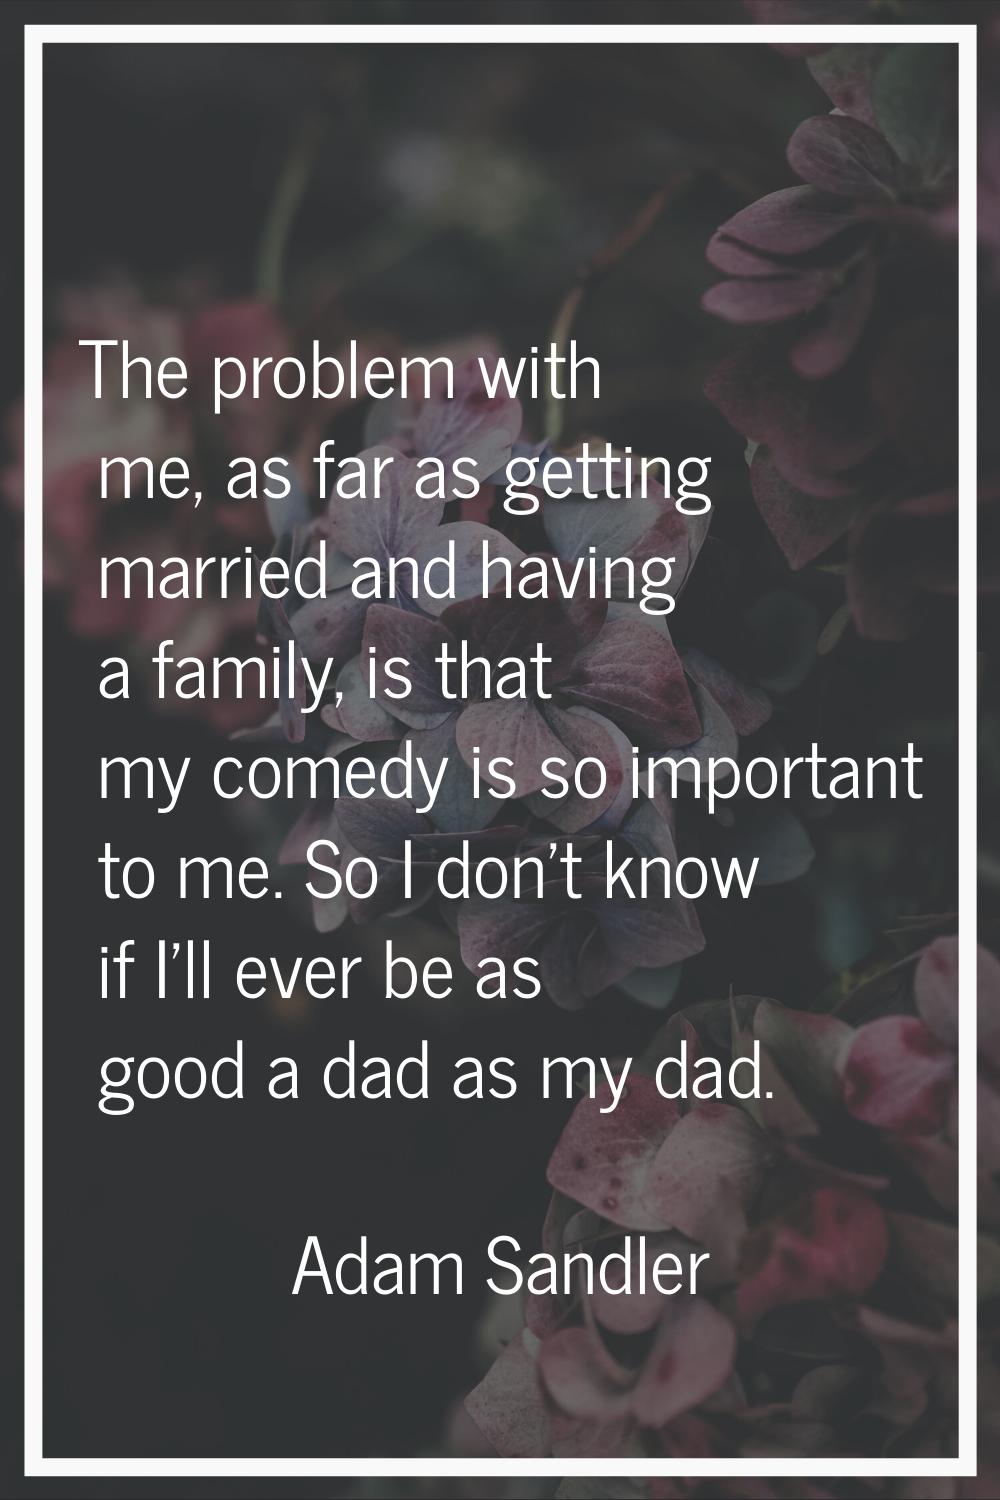 The problem with me, as far as getting married and having a family, is that my comedy is so importa